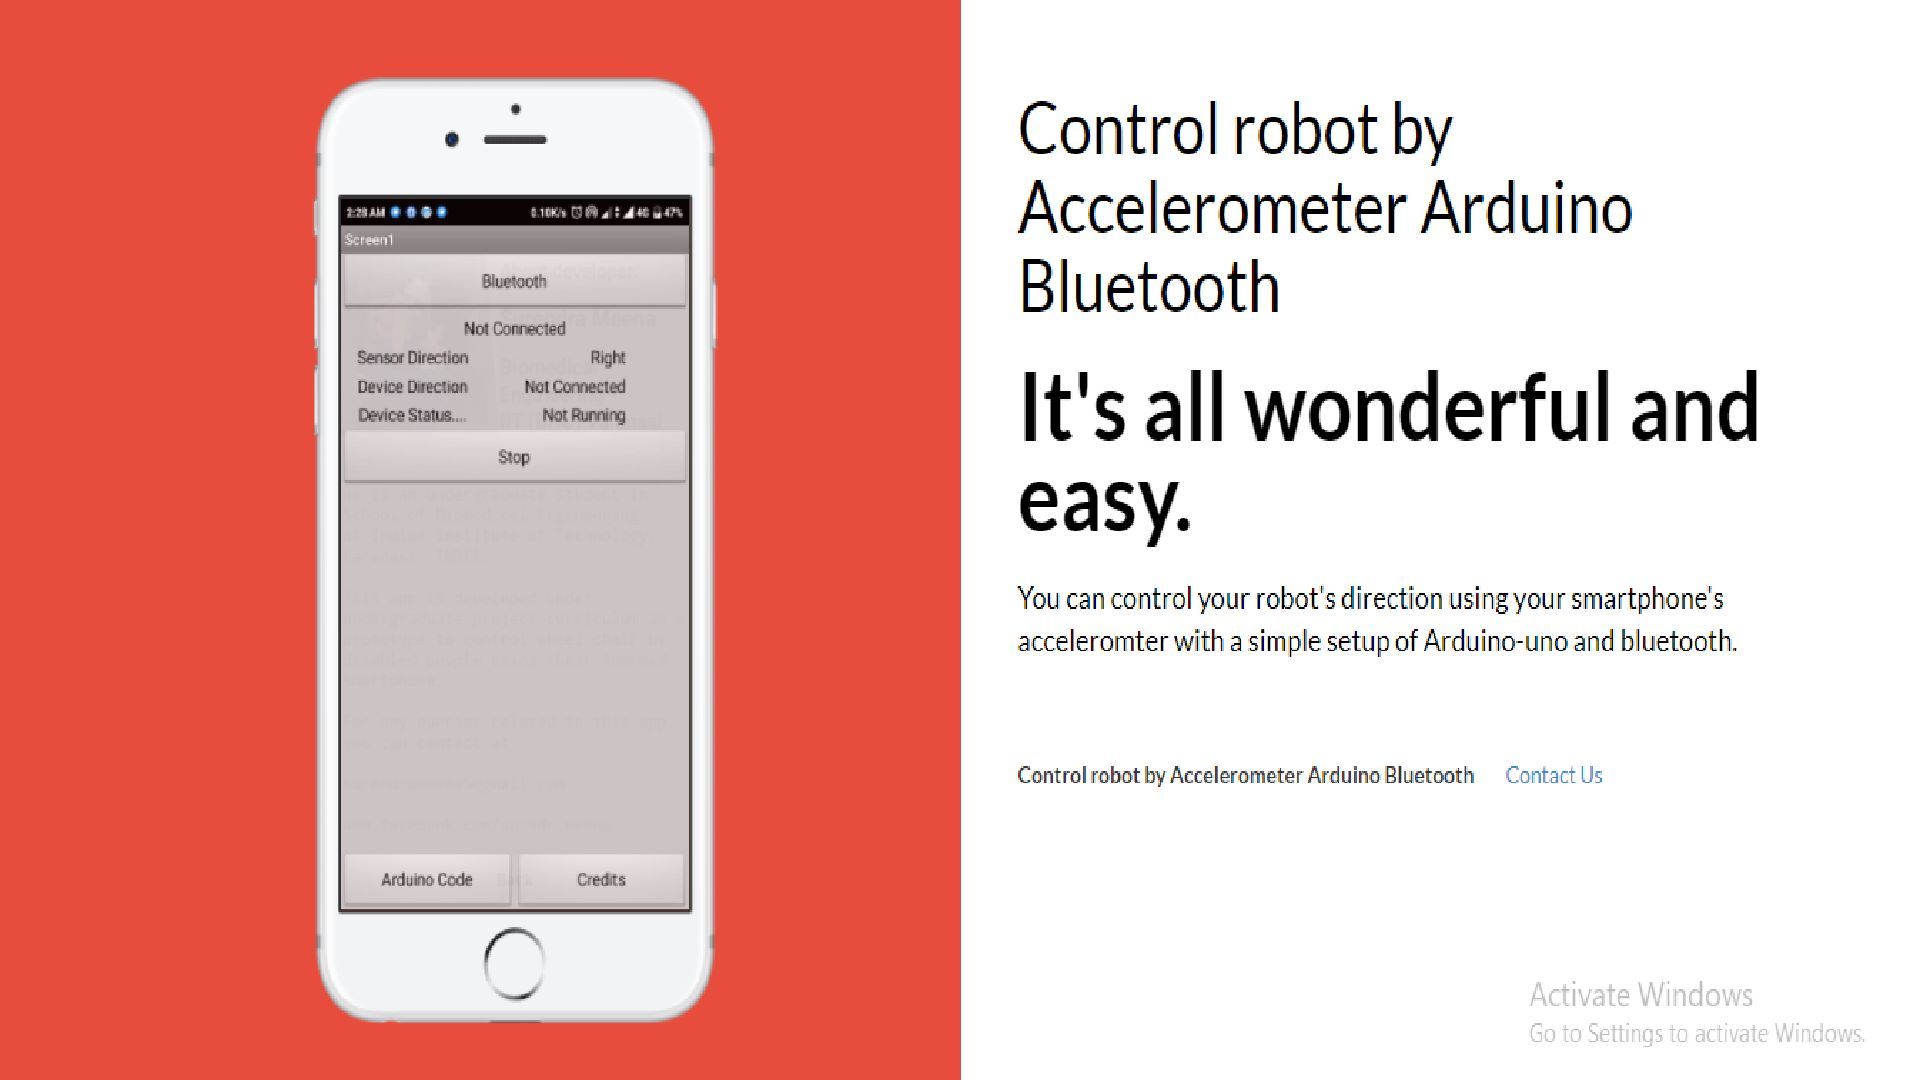 Control Robot by smartphone's Accelerometer with Arduino_Bluetooth